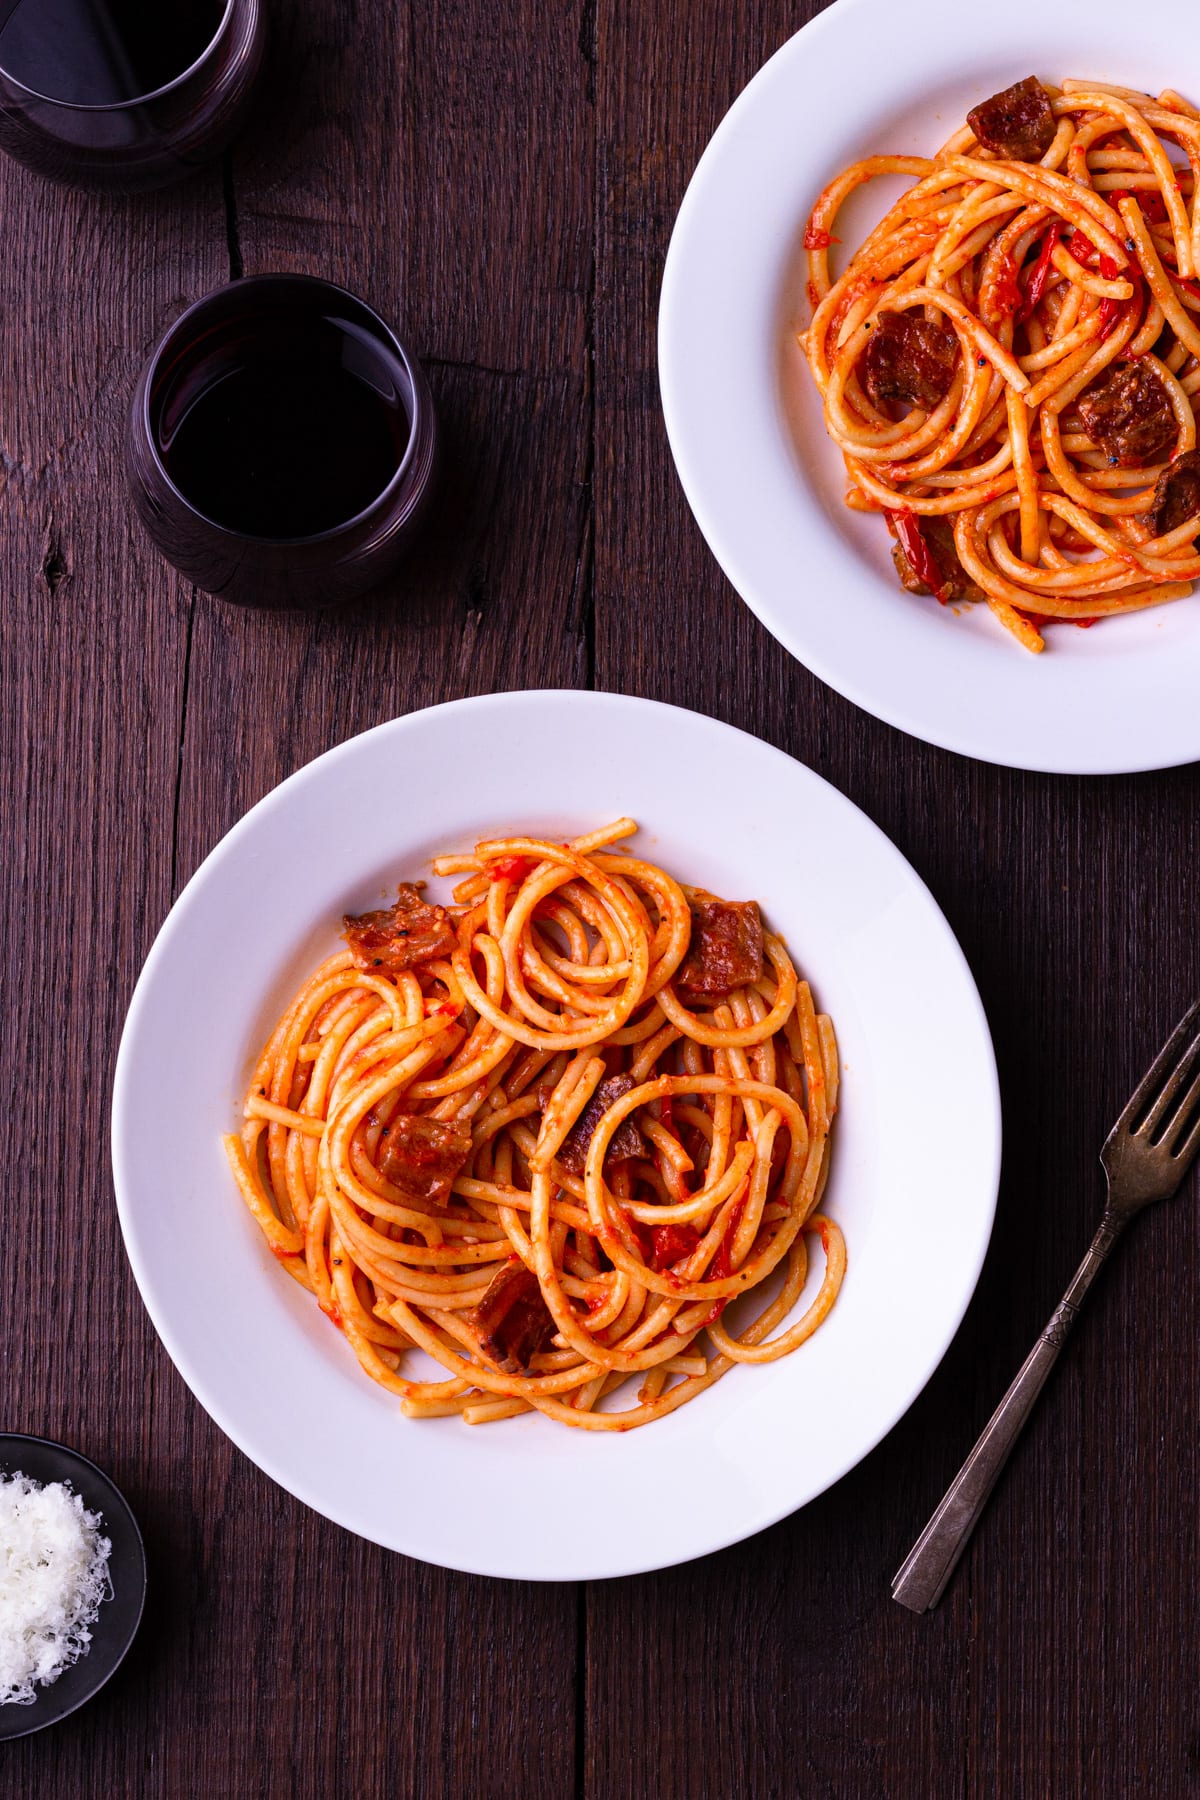 Overhead view of two bowls of Bucatini All'Amatriciana on a dark wood surface surrounded by glasses of red wine a fork.